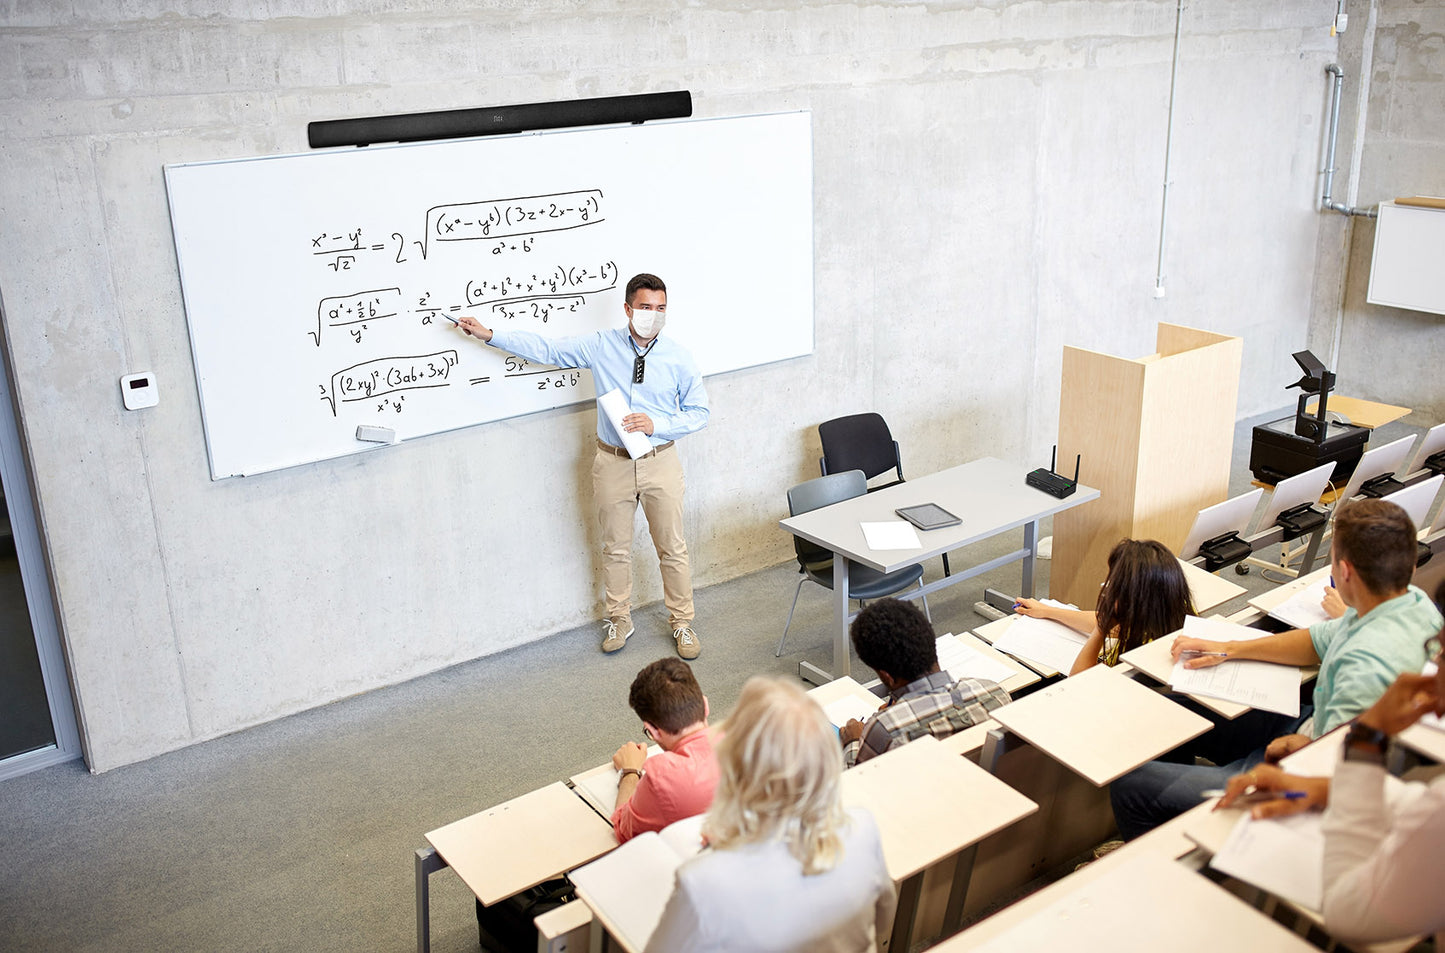 Teacher using the wireless microphone in a large classroom